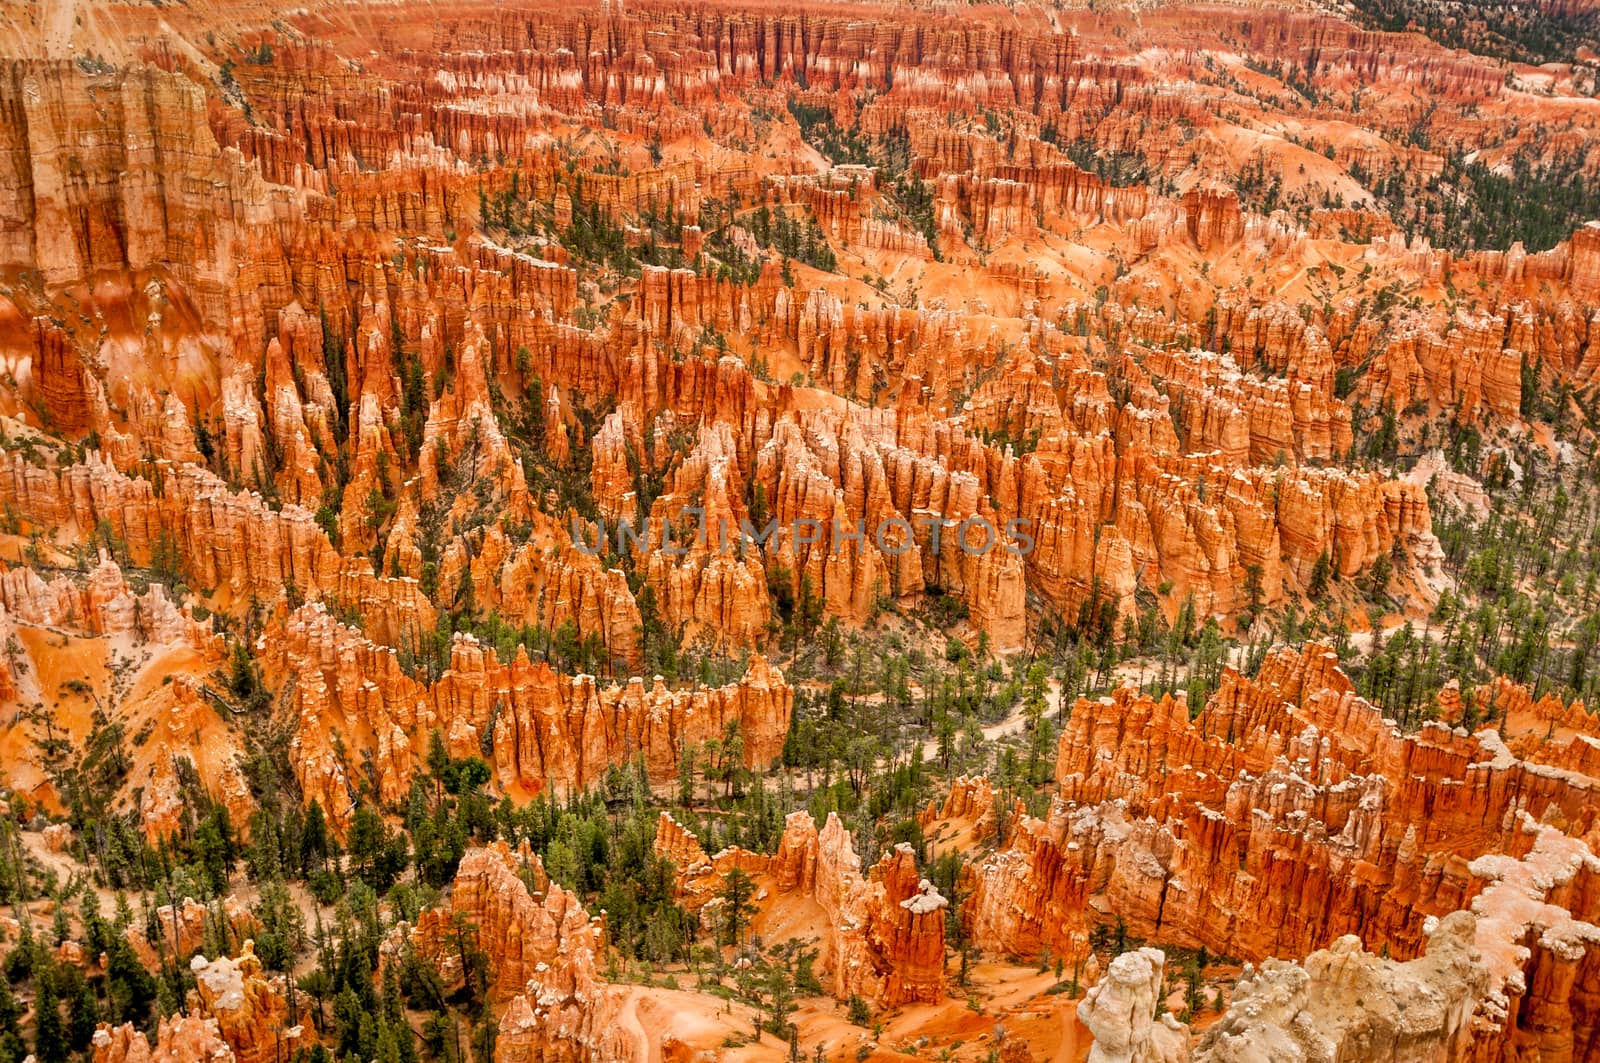 Bryce Canyon amphitheater valley by weltreisendertj